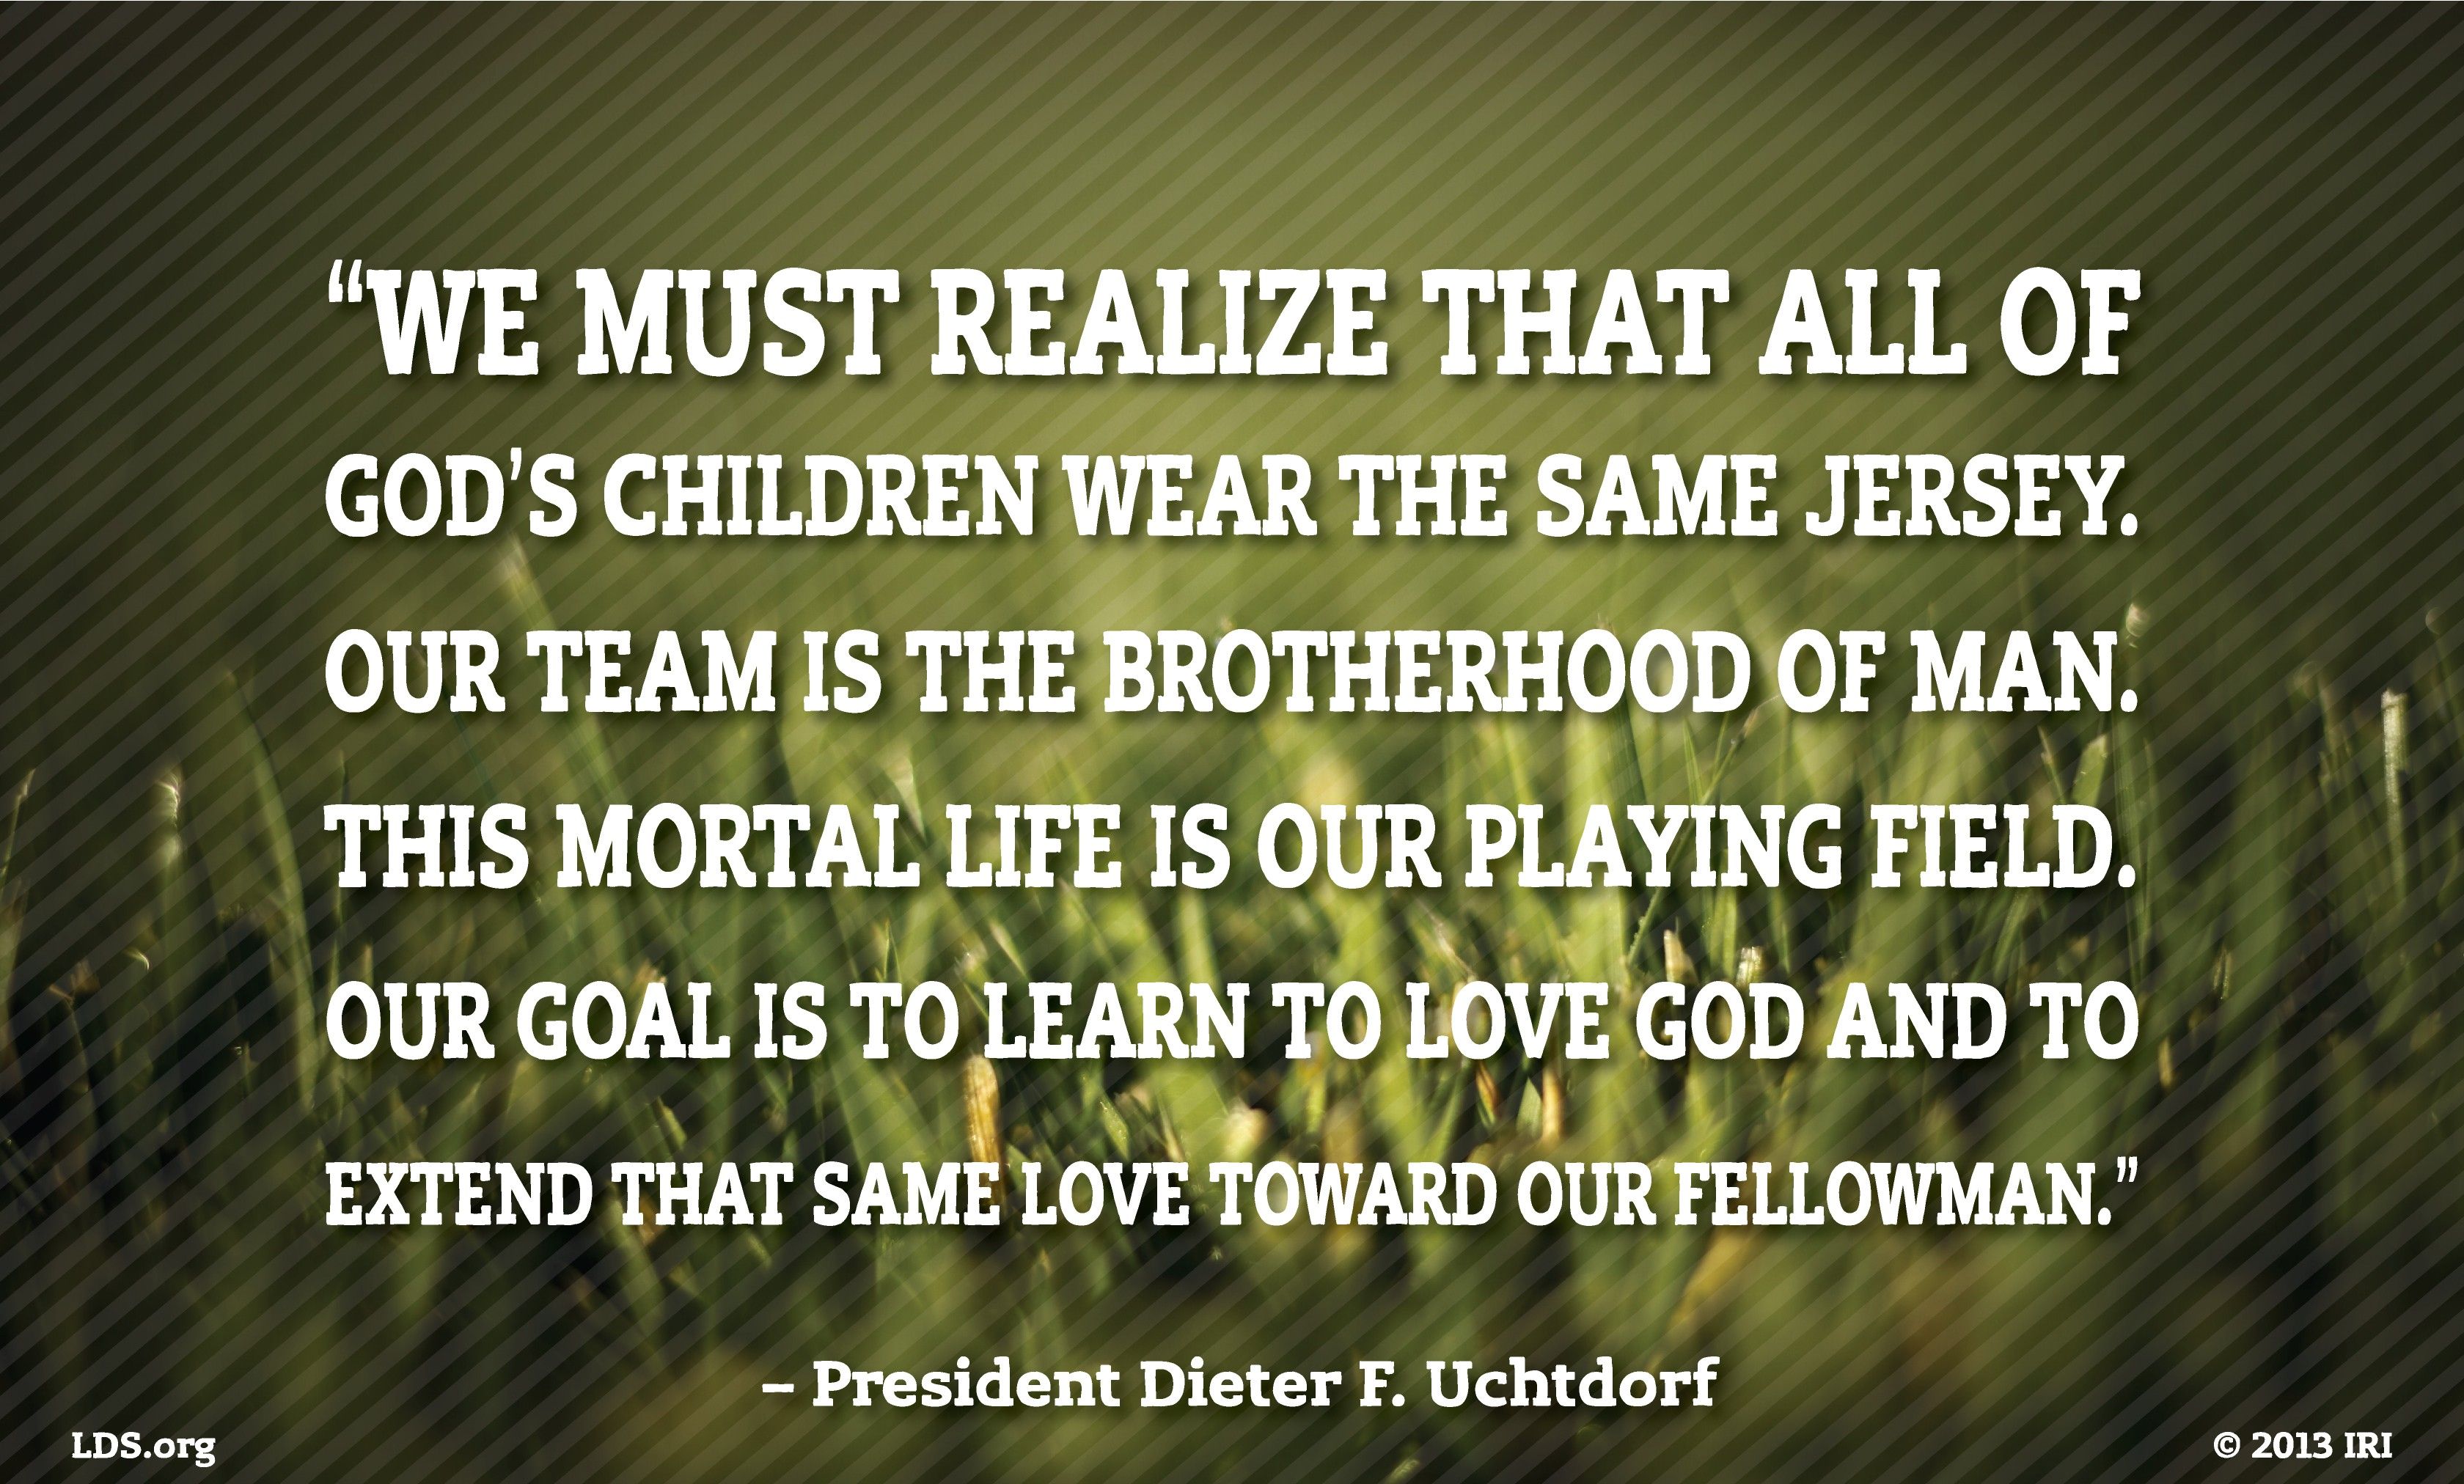 “We must realize that all of God’s children wear the same jersey. Our team is the brotherhood of man. This mortal life is our playing field. Our goal is to learn to love God and to extend that same love toward our fellowman.”—President Dieter F. Uchtdorf, “Pride and the Priesthood” © undefined ipCode 1.